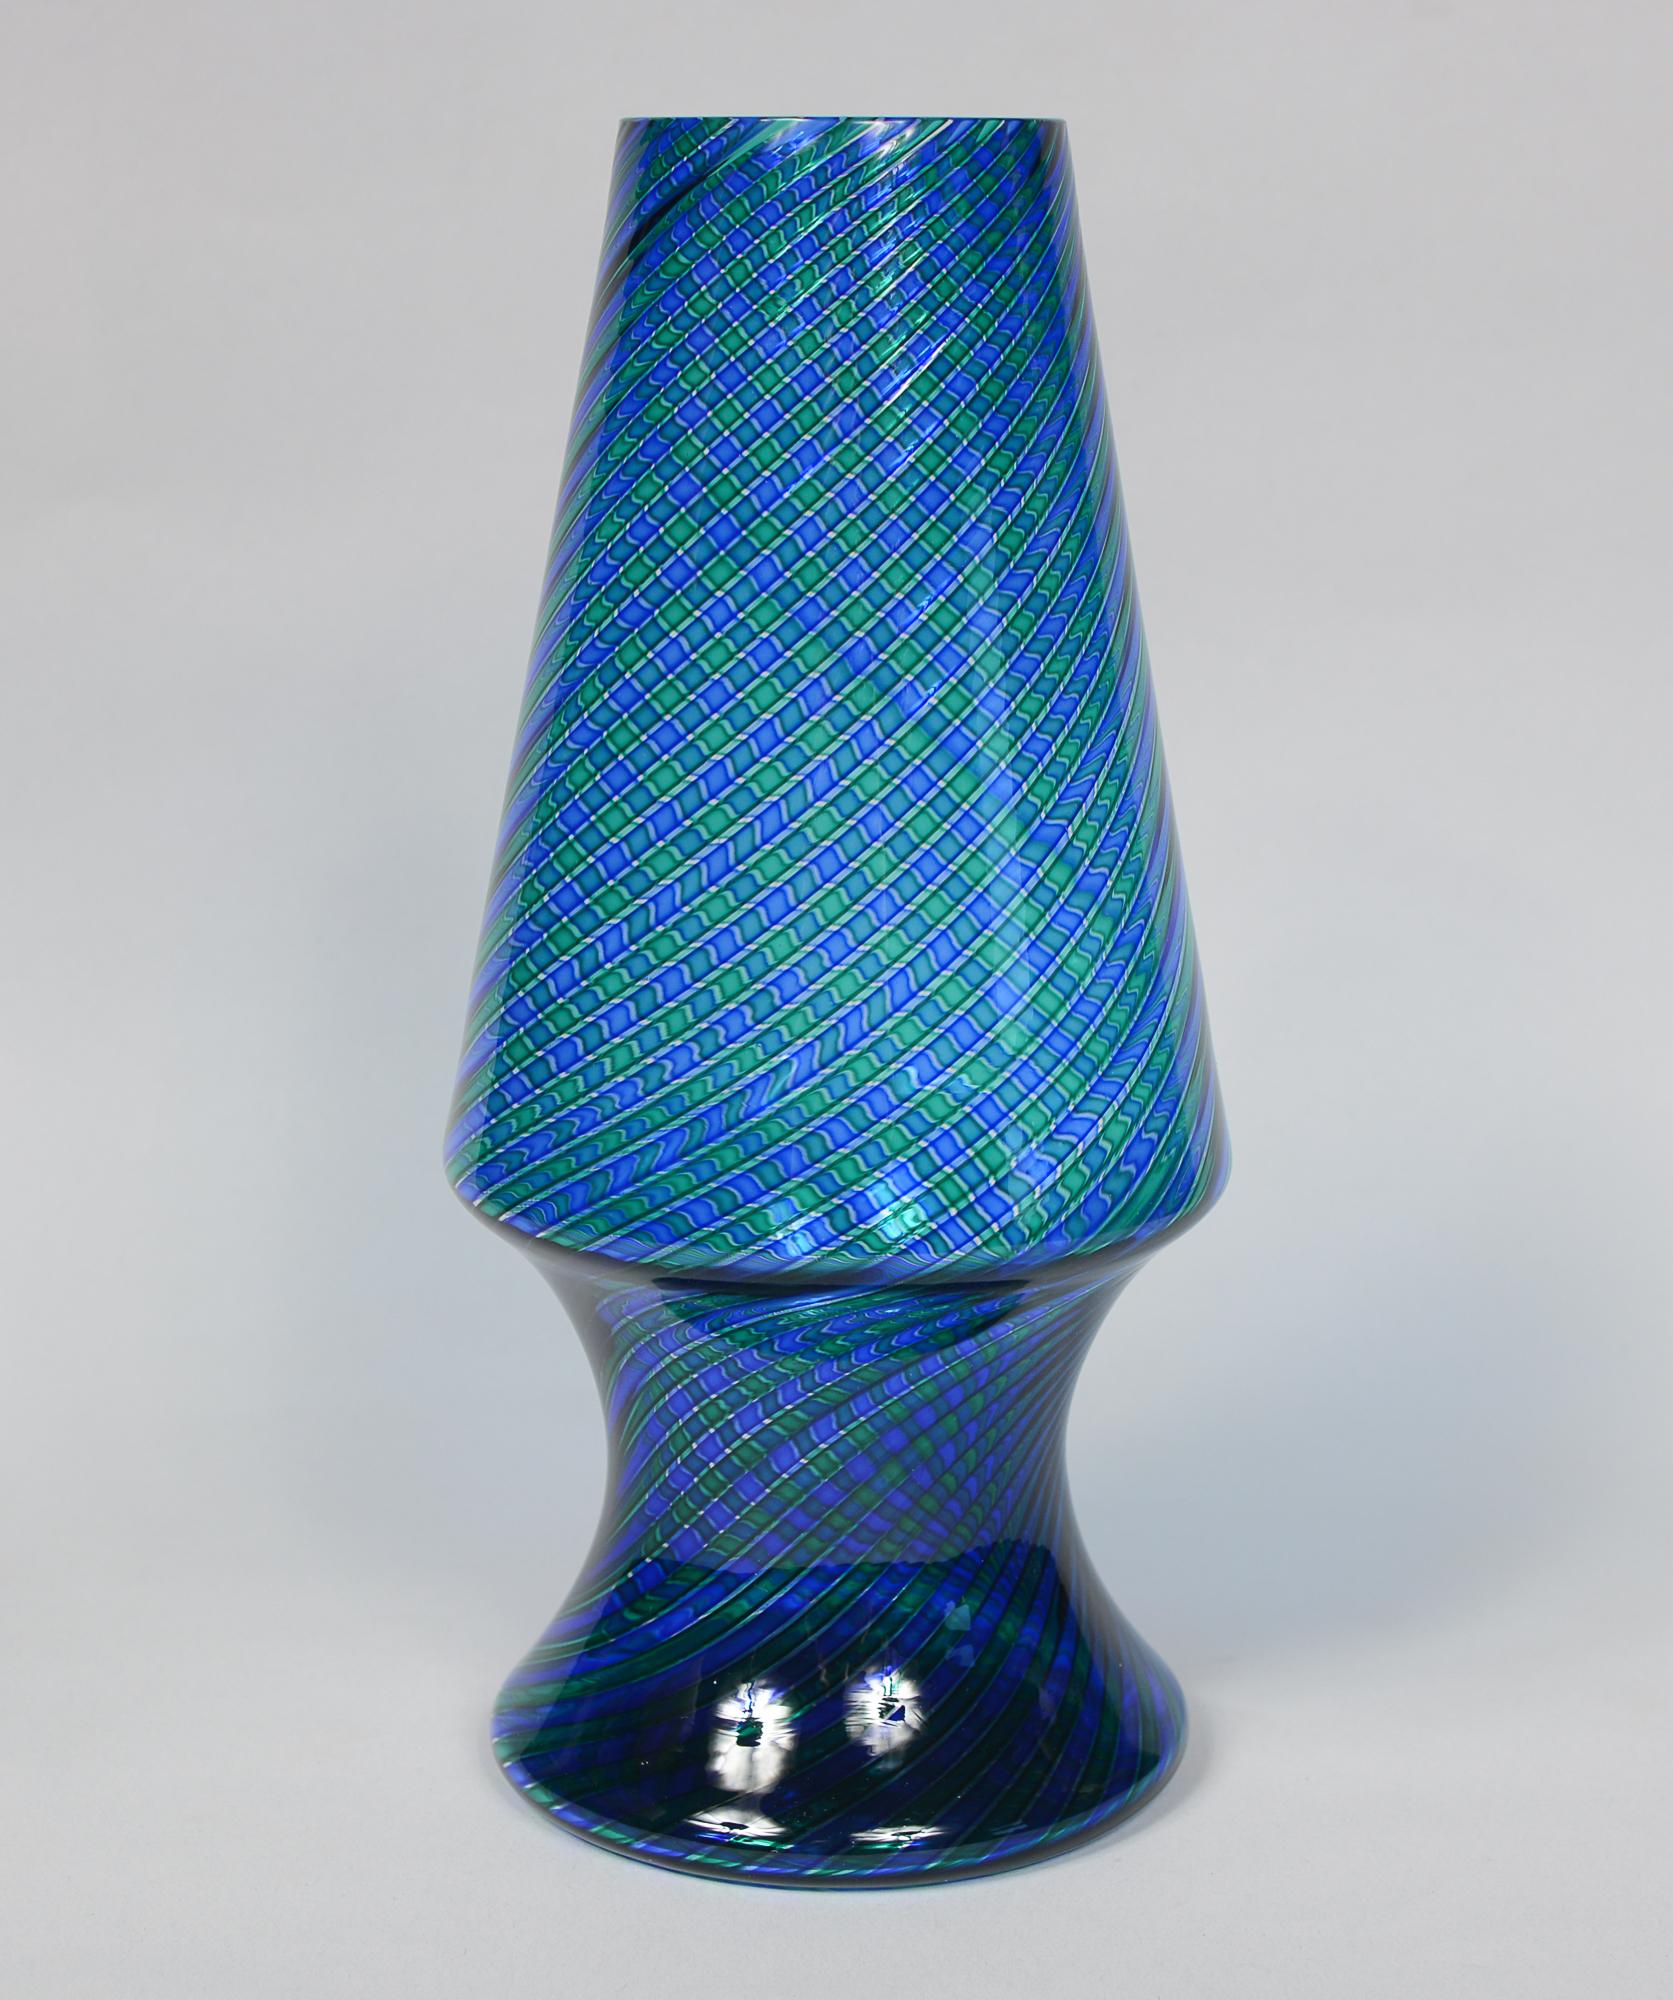 Vase by Murano glass artist Orlando Zennaro. This vase is executed in the a canne technique. The signature, Orlando Zennaro Murano Venice, is etched on the bottom.